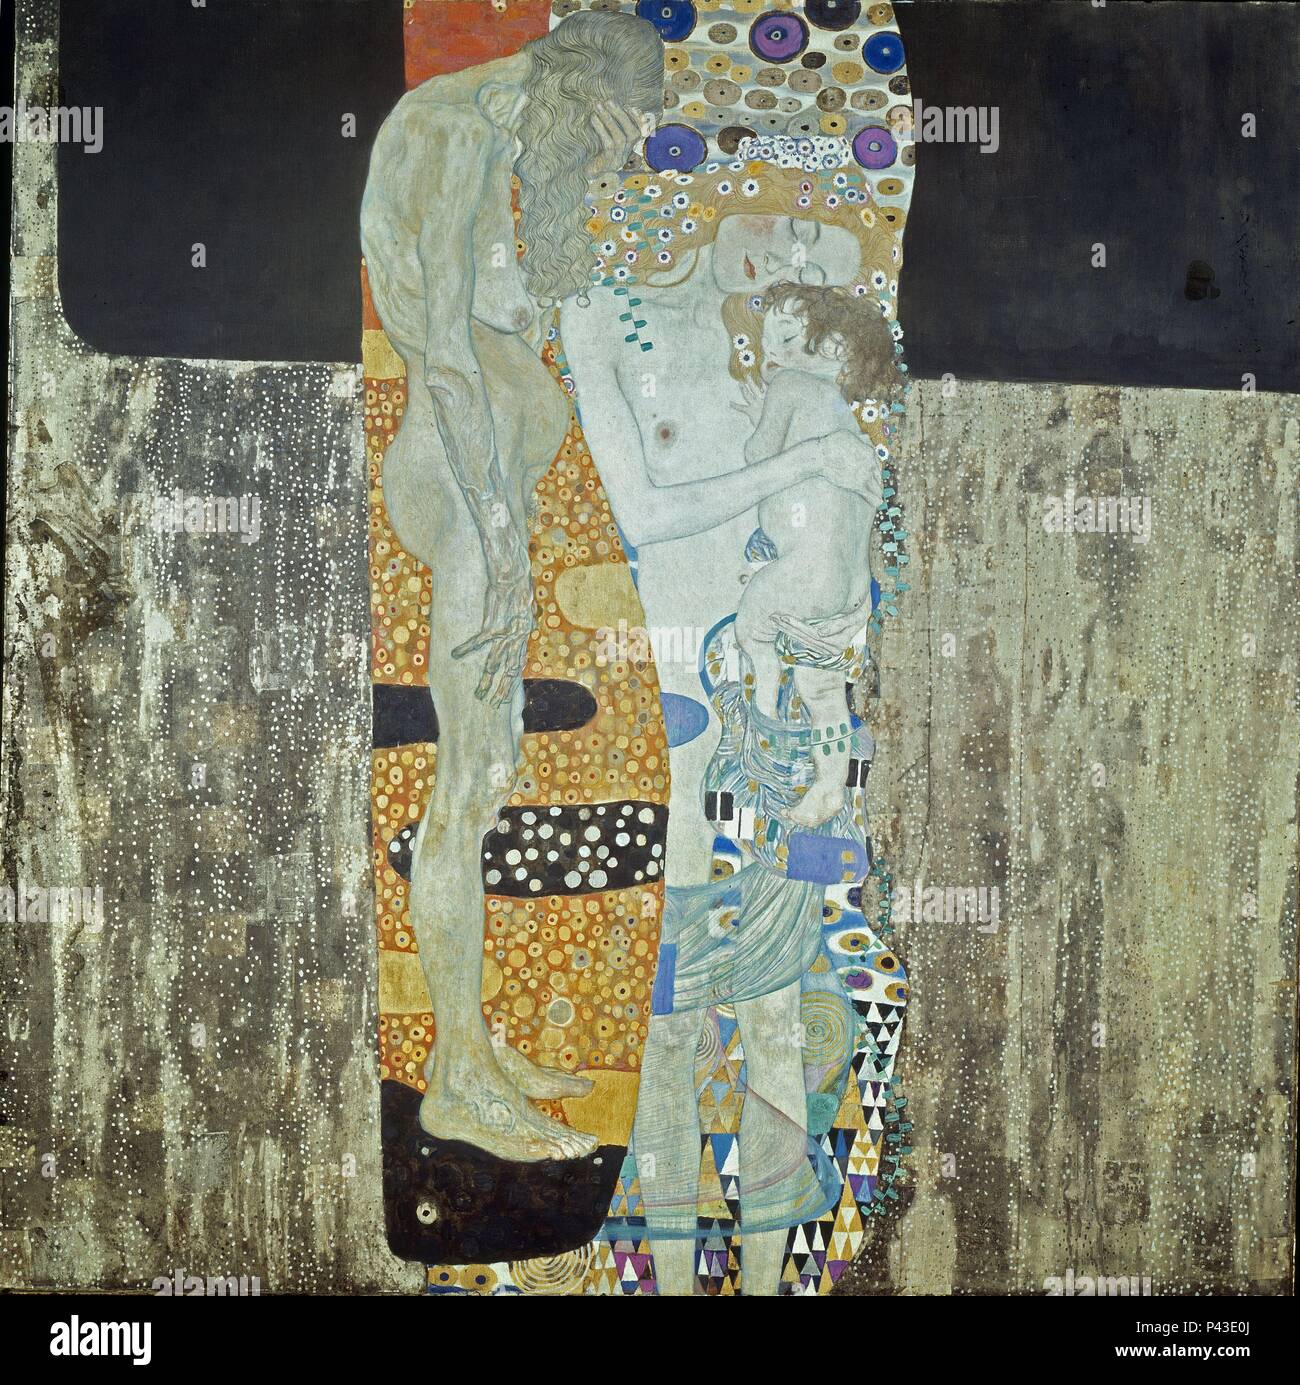 The Three Ages of Woman', 1905, Oil on canvas, 180 x 180. Author: Gustav  Klimt (1862-1918). Location: MUSEE NATIONAL D'ART MODERNE, ROME, ITALIA  Stock Photo - Alamy